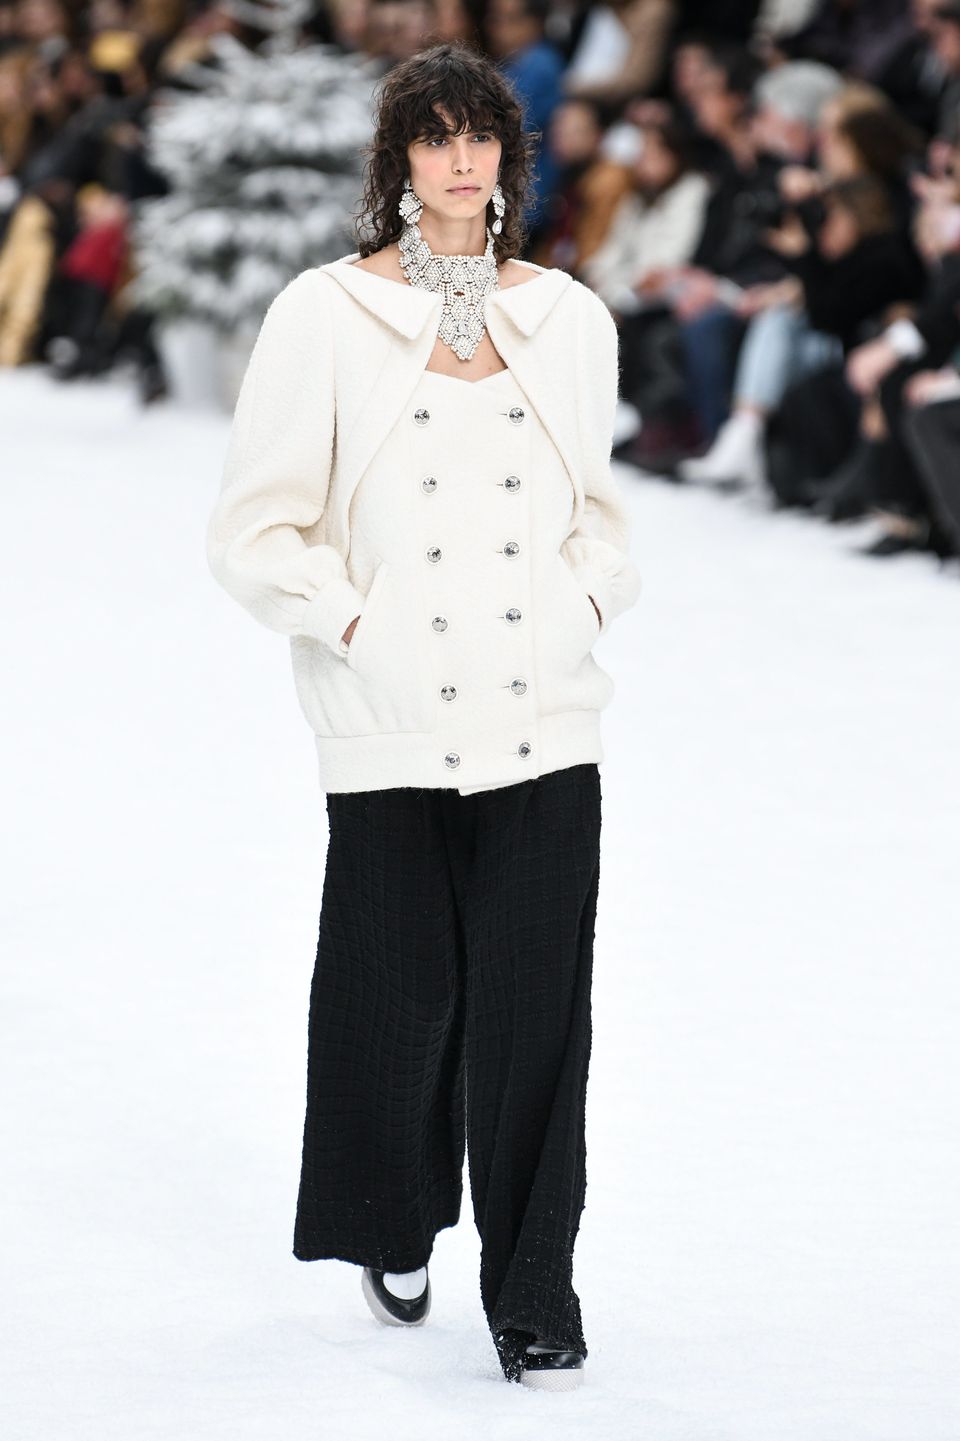 Karl Lagerfeld's Final Chanel Show: See All The Photos